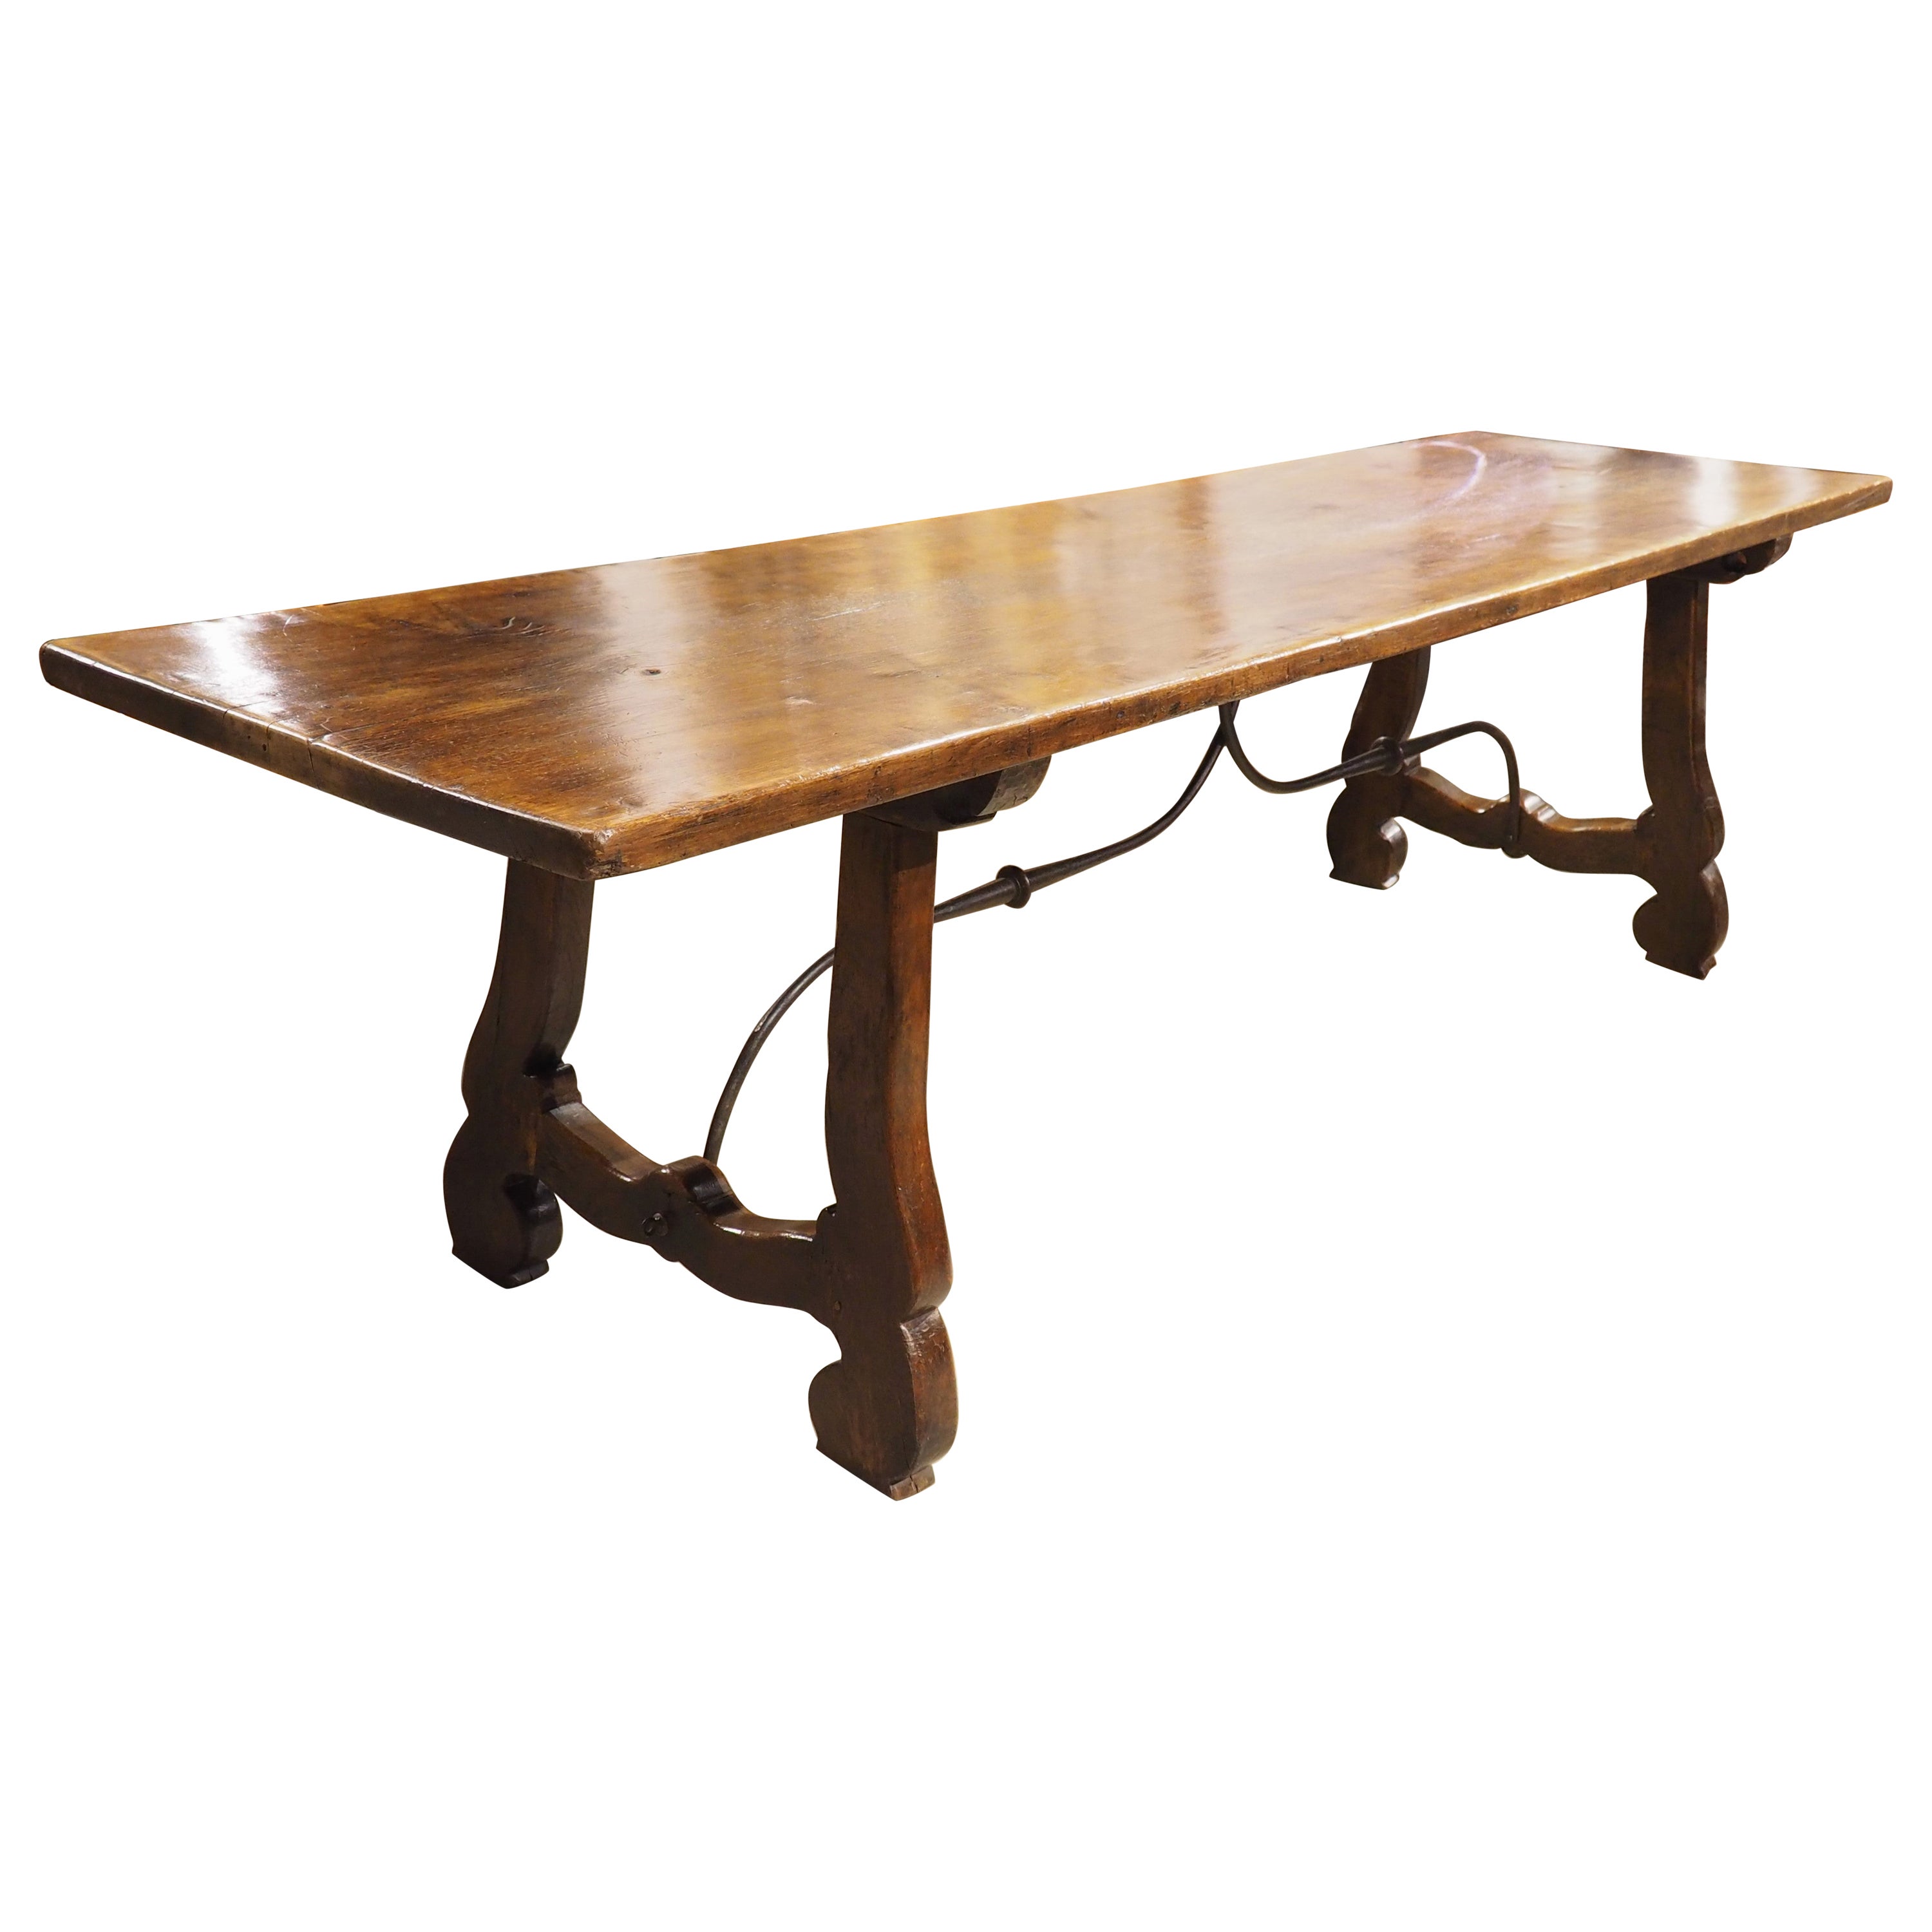 An Elegant 18th Century Single Walnut Plank Top Dining Table from Spain For Sale